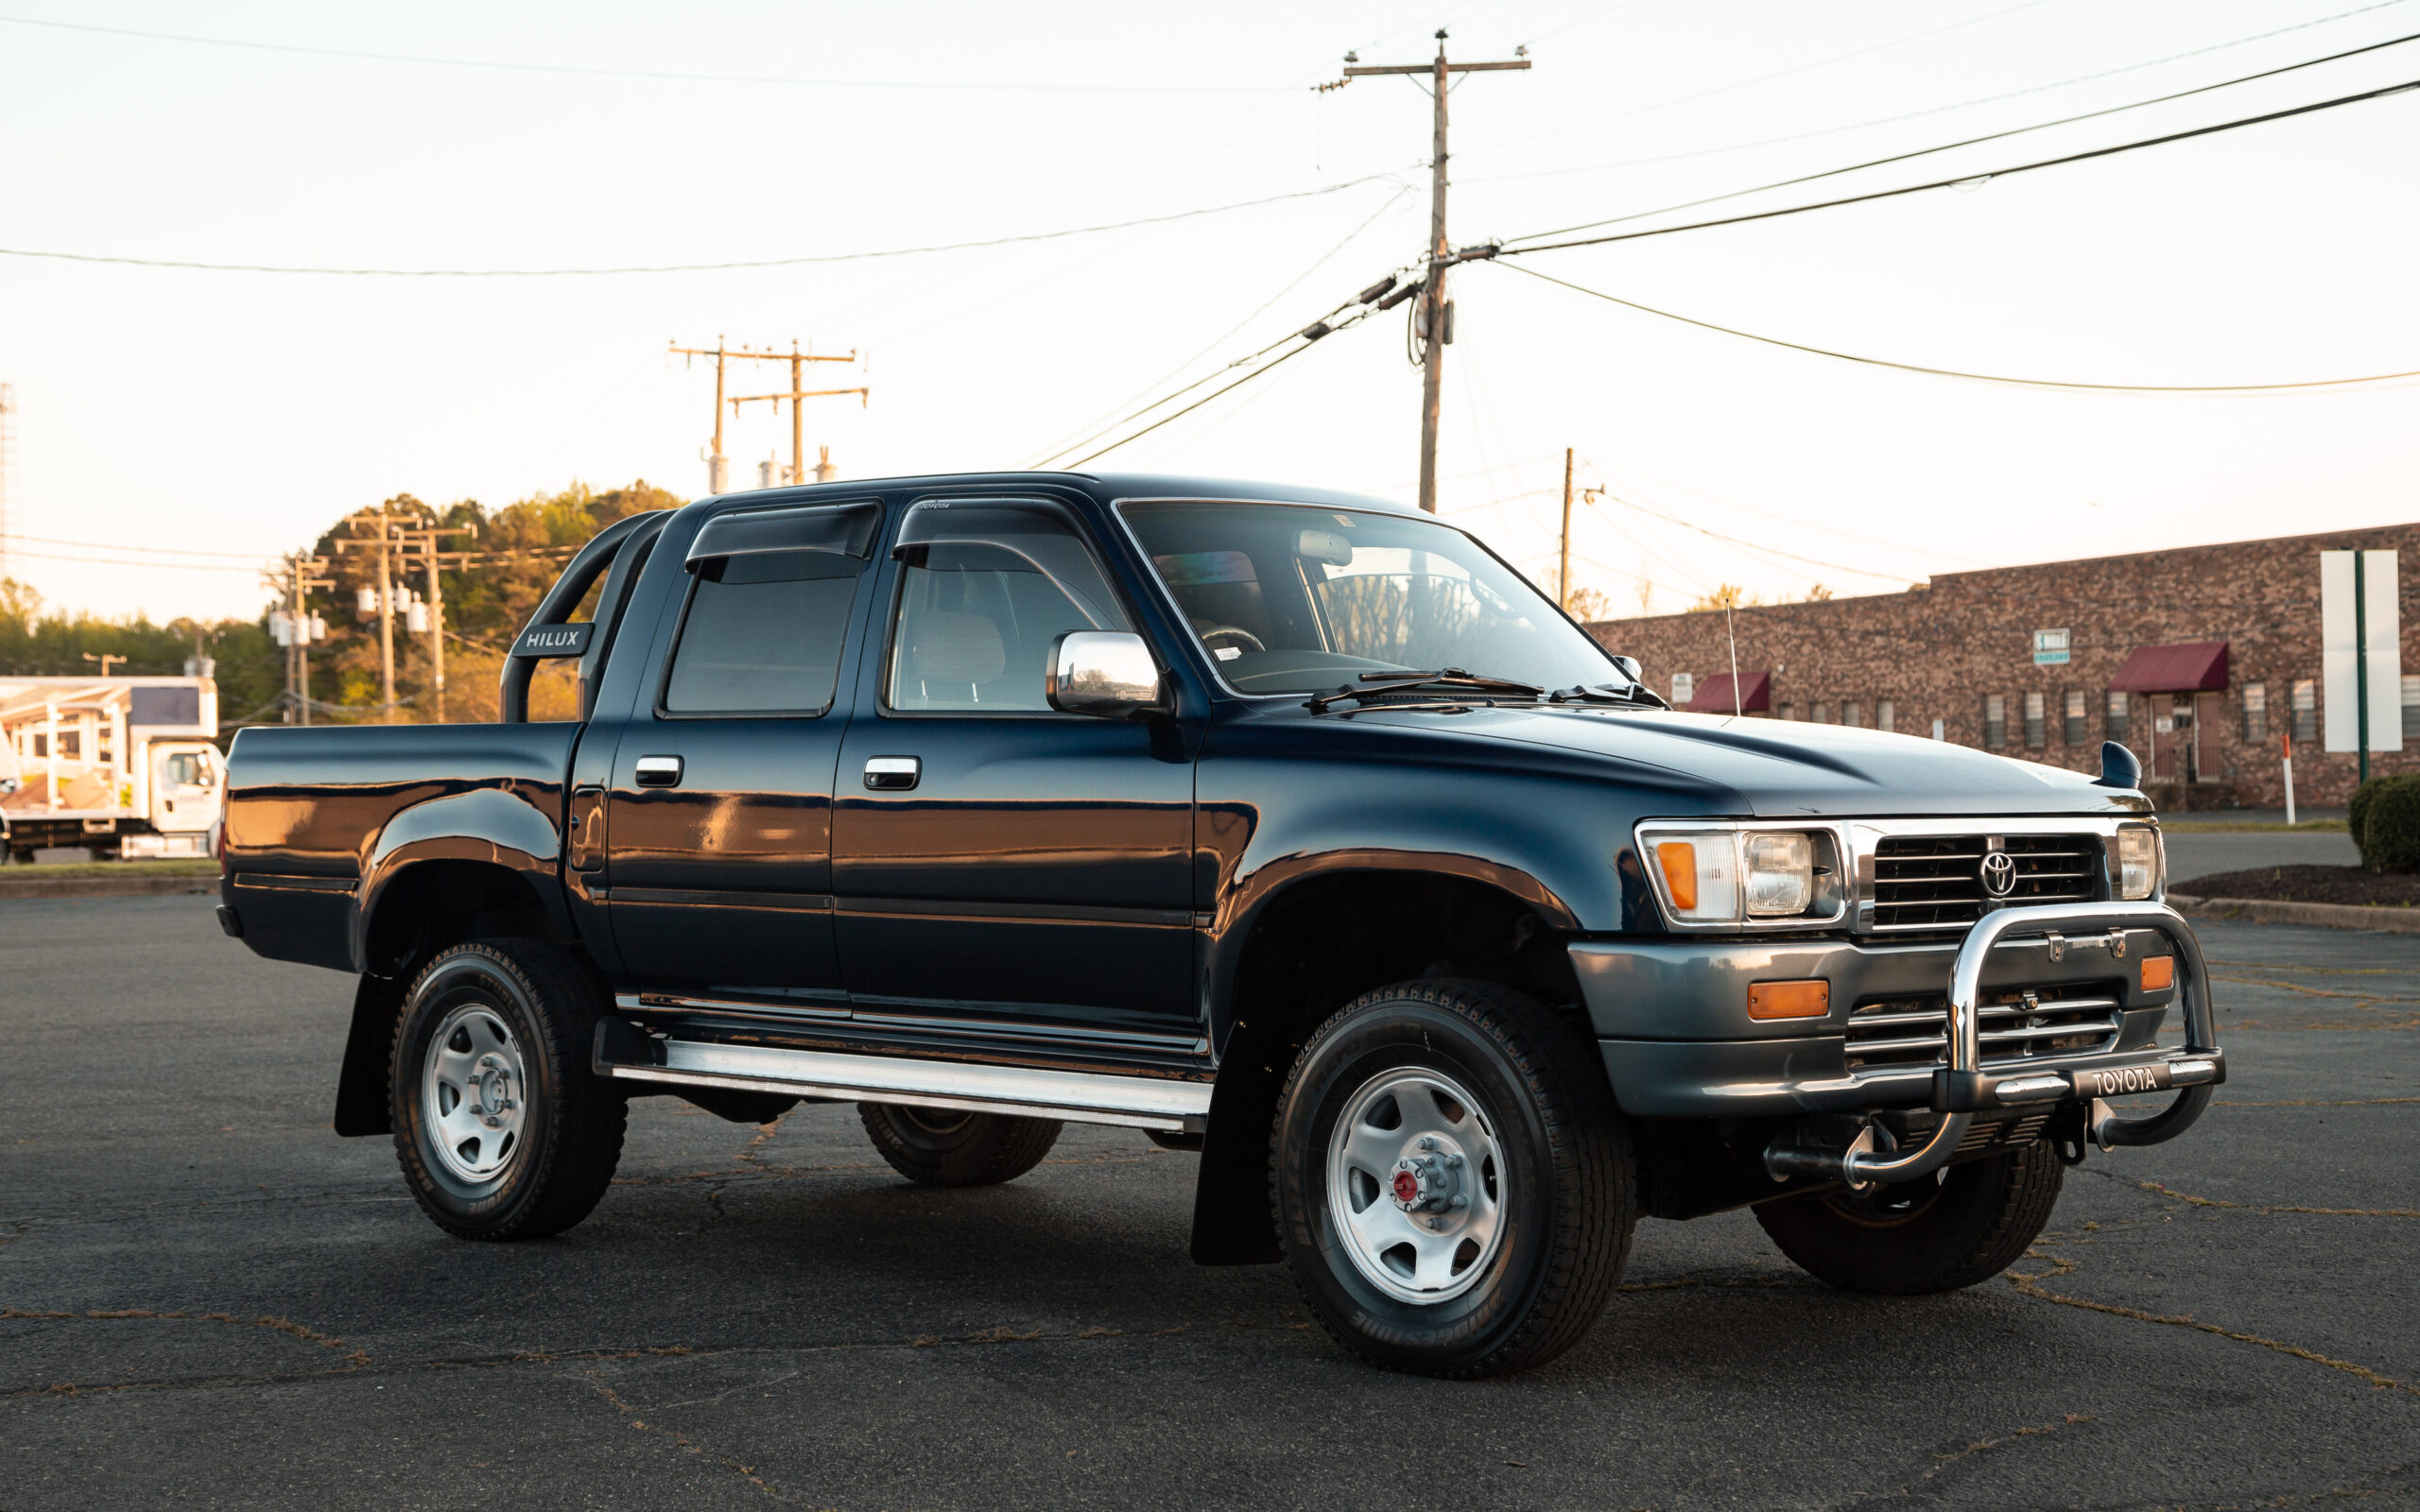 toyota-hilux-for-sale-virginia-04